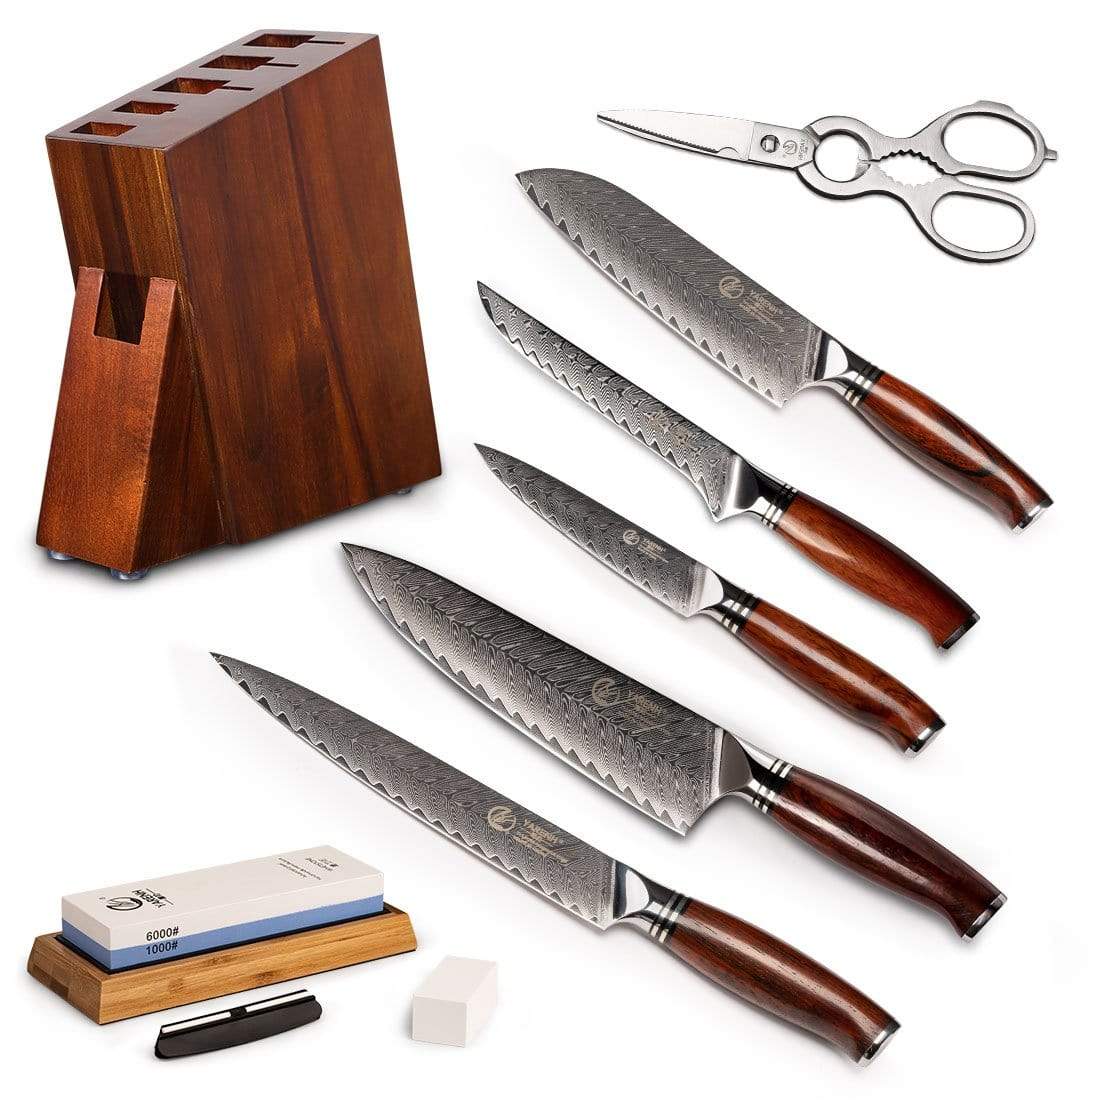 8-piece Premium Japanese Kitchen Knife Set with Laser Damascus Pattern -  Imperial Collection - Chef's Knife, Paring Knife, Bread Knife & More